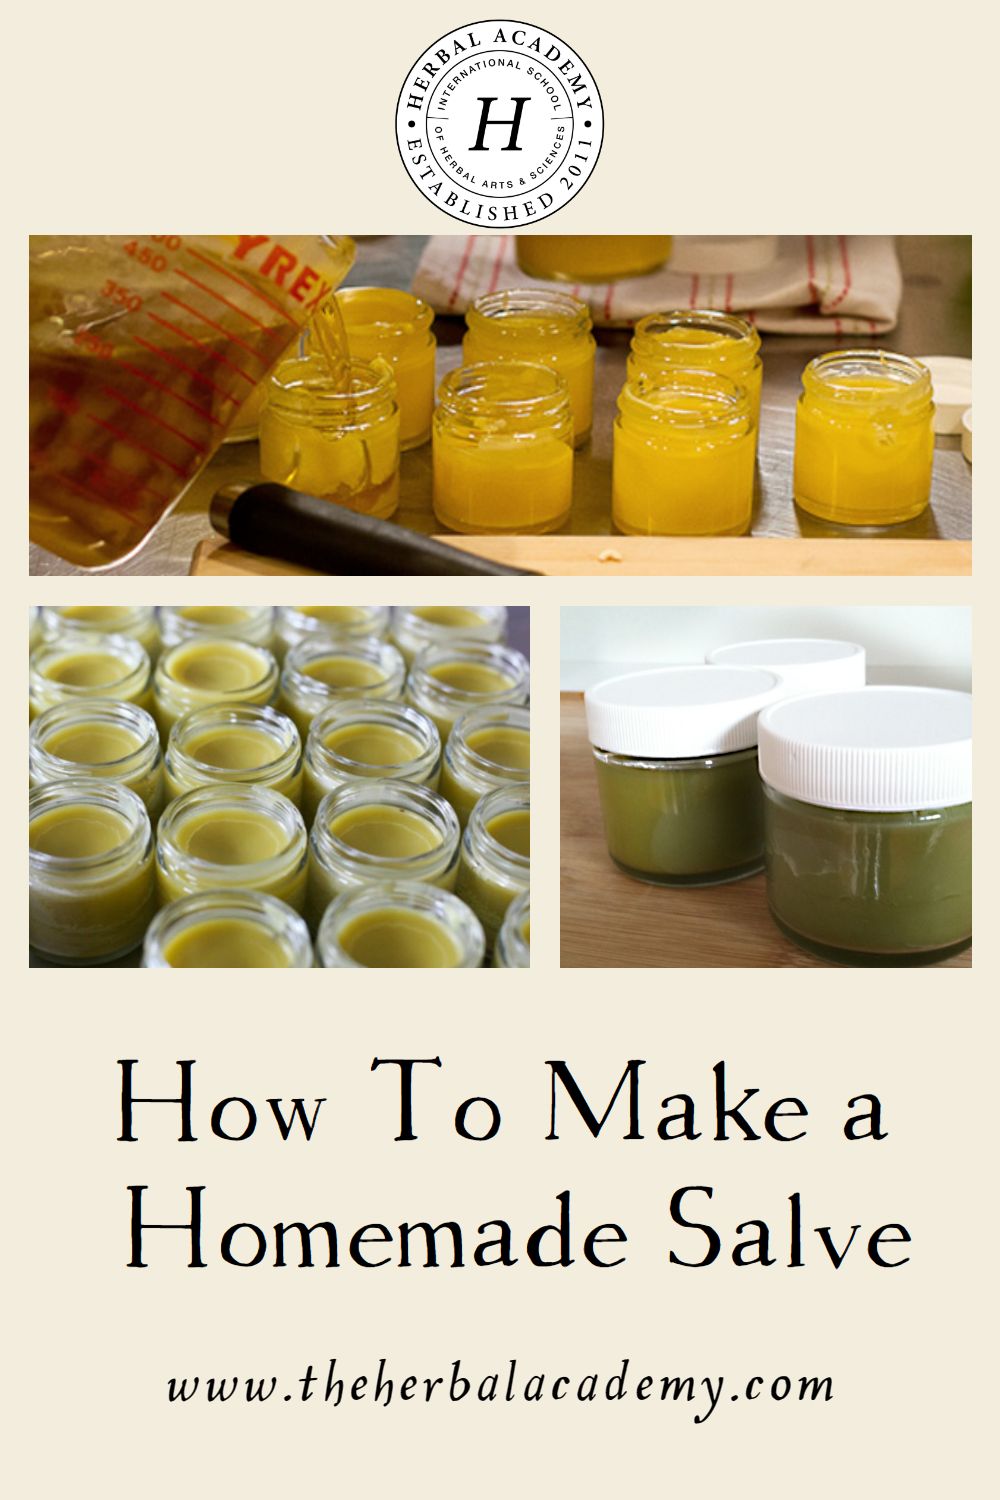 How To Make a Homemade Salve | Herbal Academy | Making a homemade salve is easier than you think! We are sharing two recipes and a tutorial for making a homemade salve.